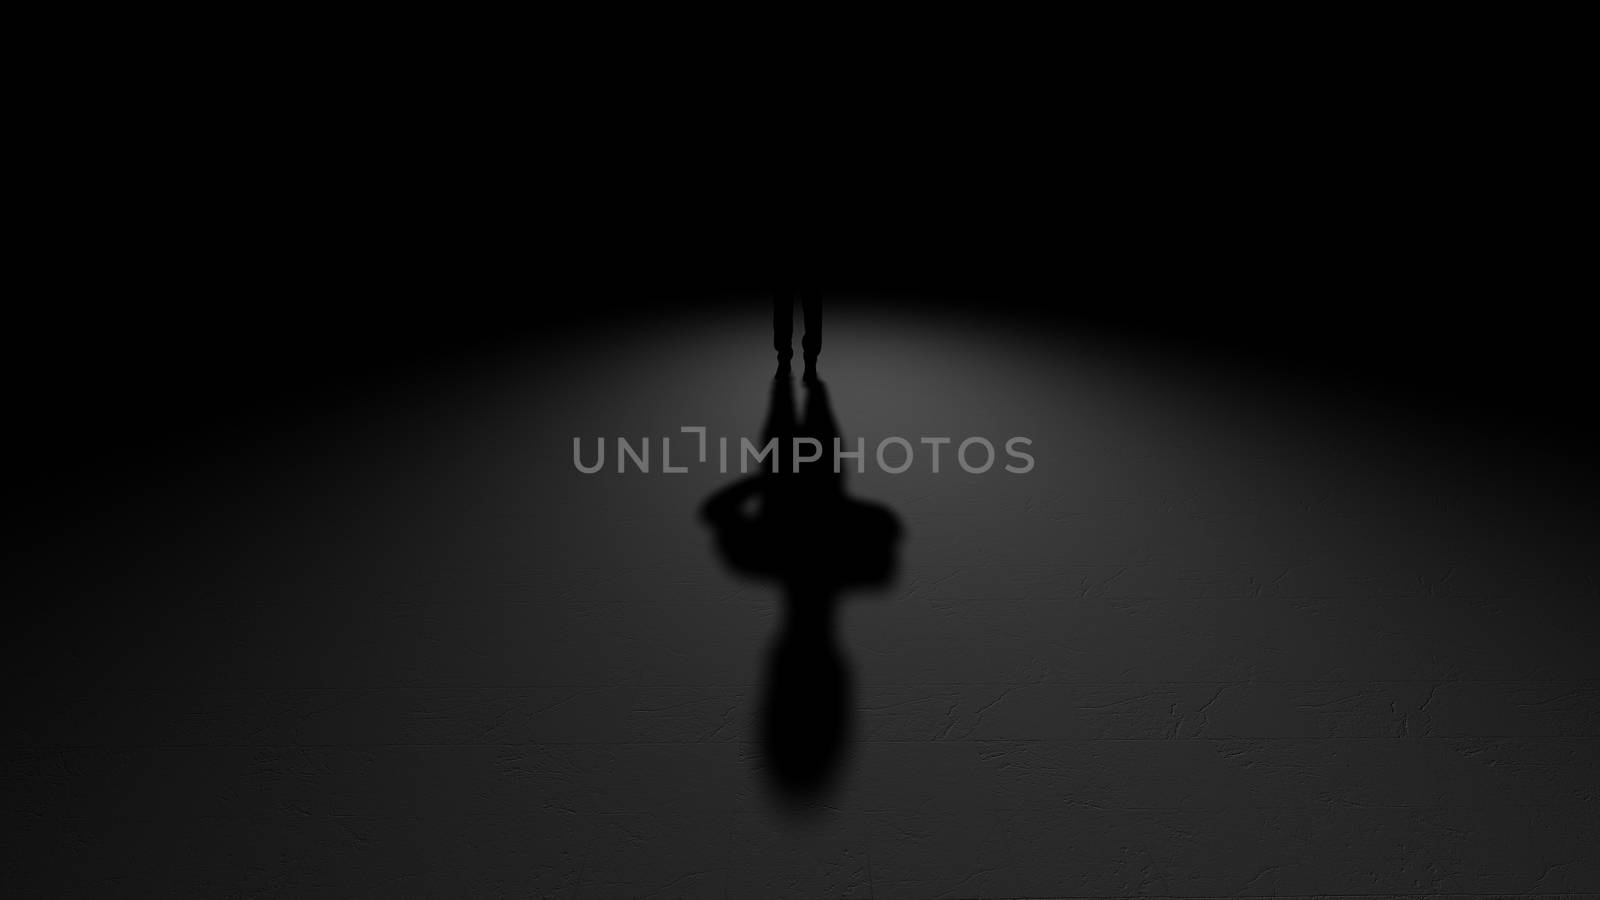 A business man shadow on a concrete floor. Symbol of a mystery or a big business or some illigal acts. 3d illustration.